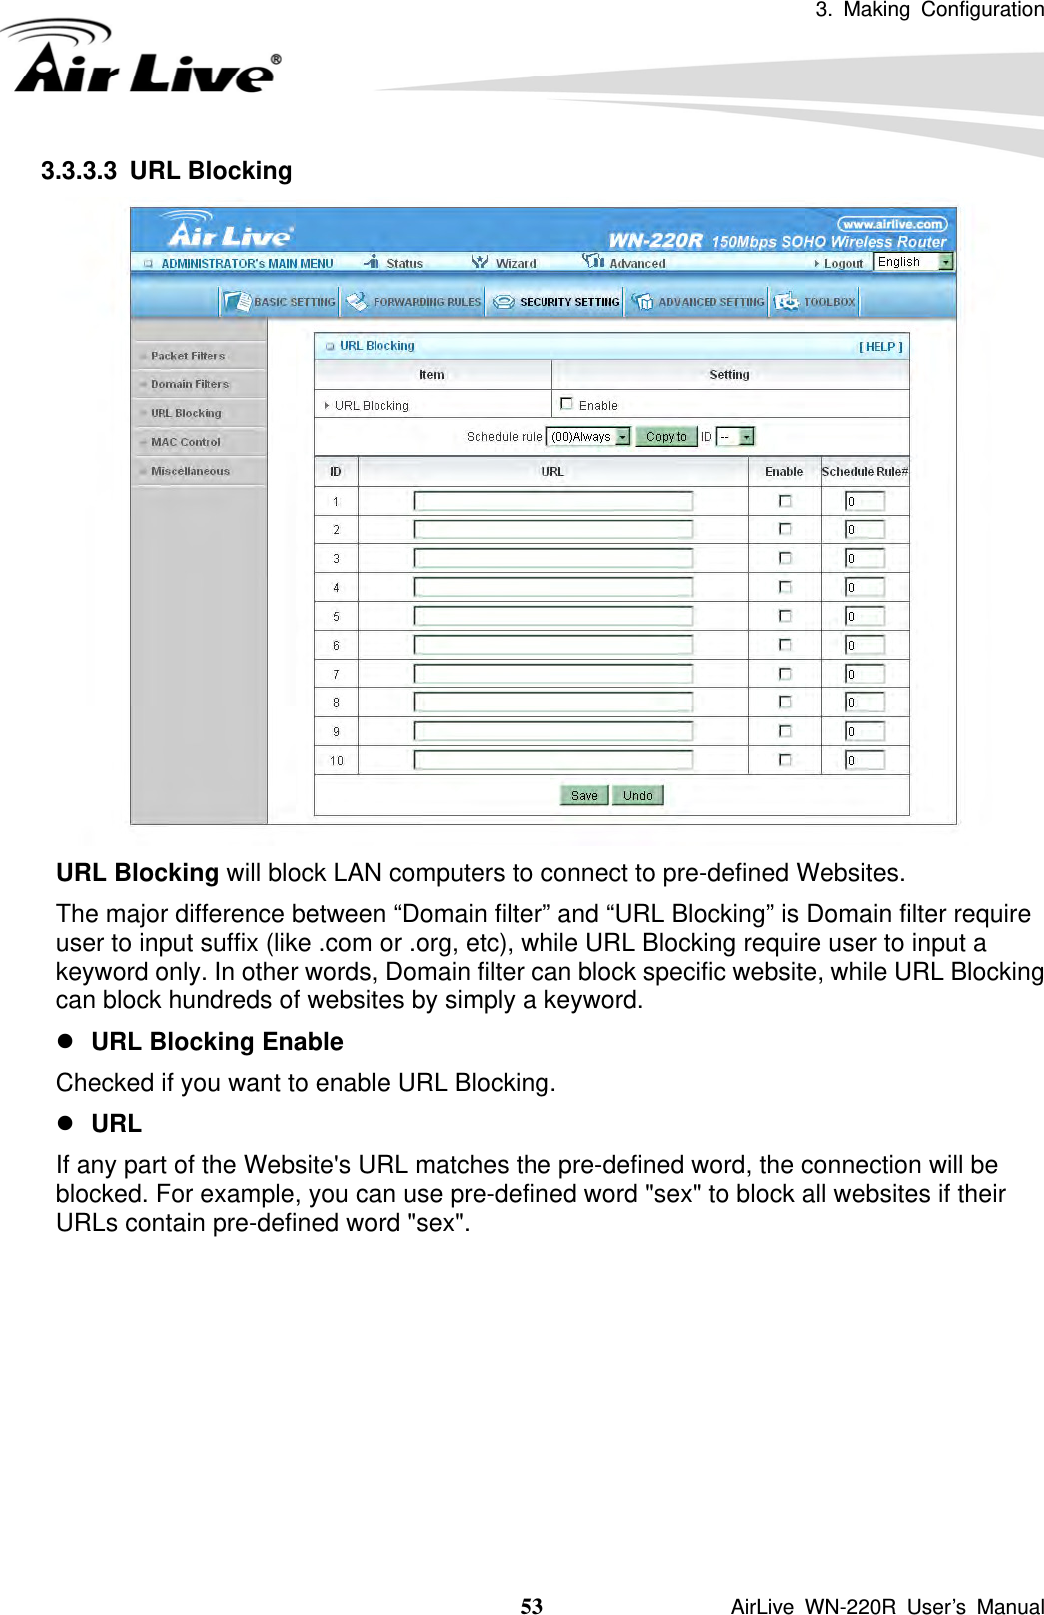 3. Making Configuration  53               AirLive WN-220R User’s Manual 3.3.3.3 URL Blocking  URL Blocking will block LAN computers to connect to pre-defined Websites. The major difference between “Domain filter” and “URL Blocking” is Domain filter require user to input suffix (like .com or .org, etc), while URL Blocking require user to input a keyword only. In other words, Domain filter can block specific website, while URL Blocking can block hundreds of websites by simply a keyword. z URL Blocking Enable Checked if you want to enable URL Blocking.   z URL If any part of the Website&apos;s URL matches the pre-defined word, the connection will be blocked. For example, you can use pre-defined word &quot;sex&quot; to block all websites if their URLs contain pre-defined word &quot;sex&quot;.           